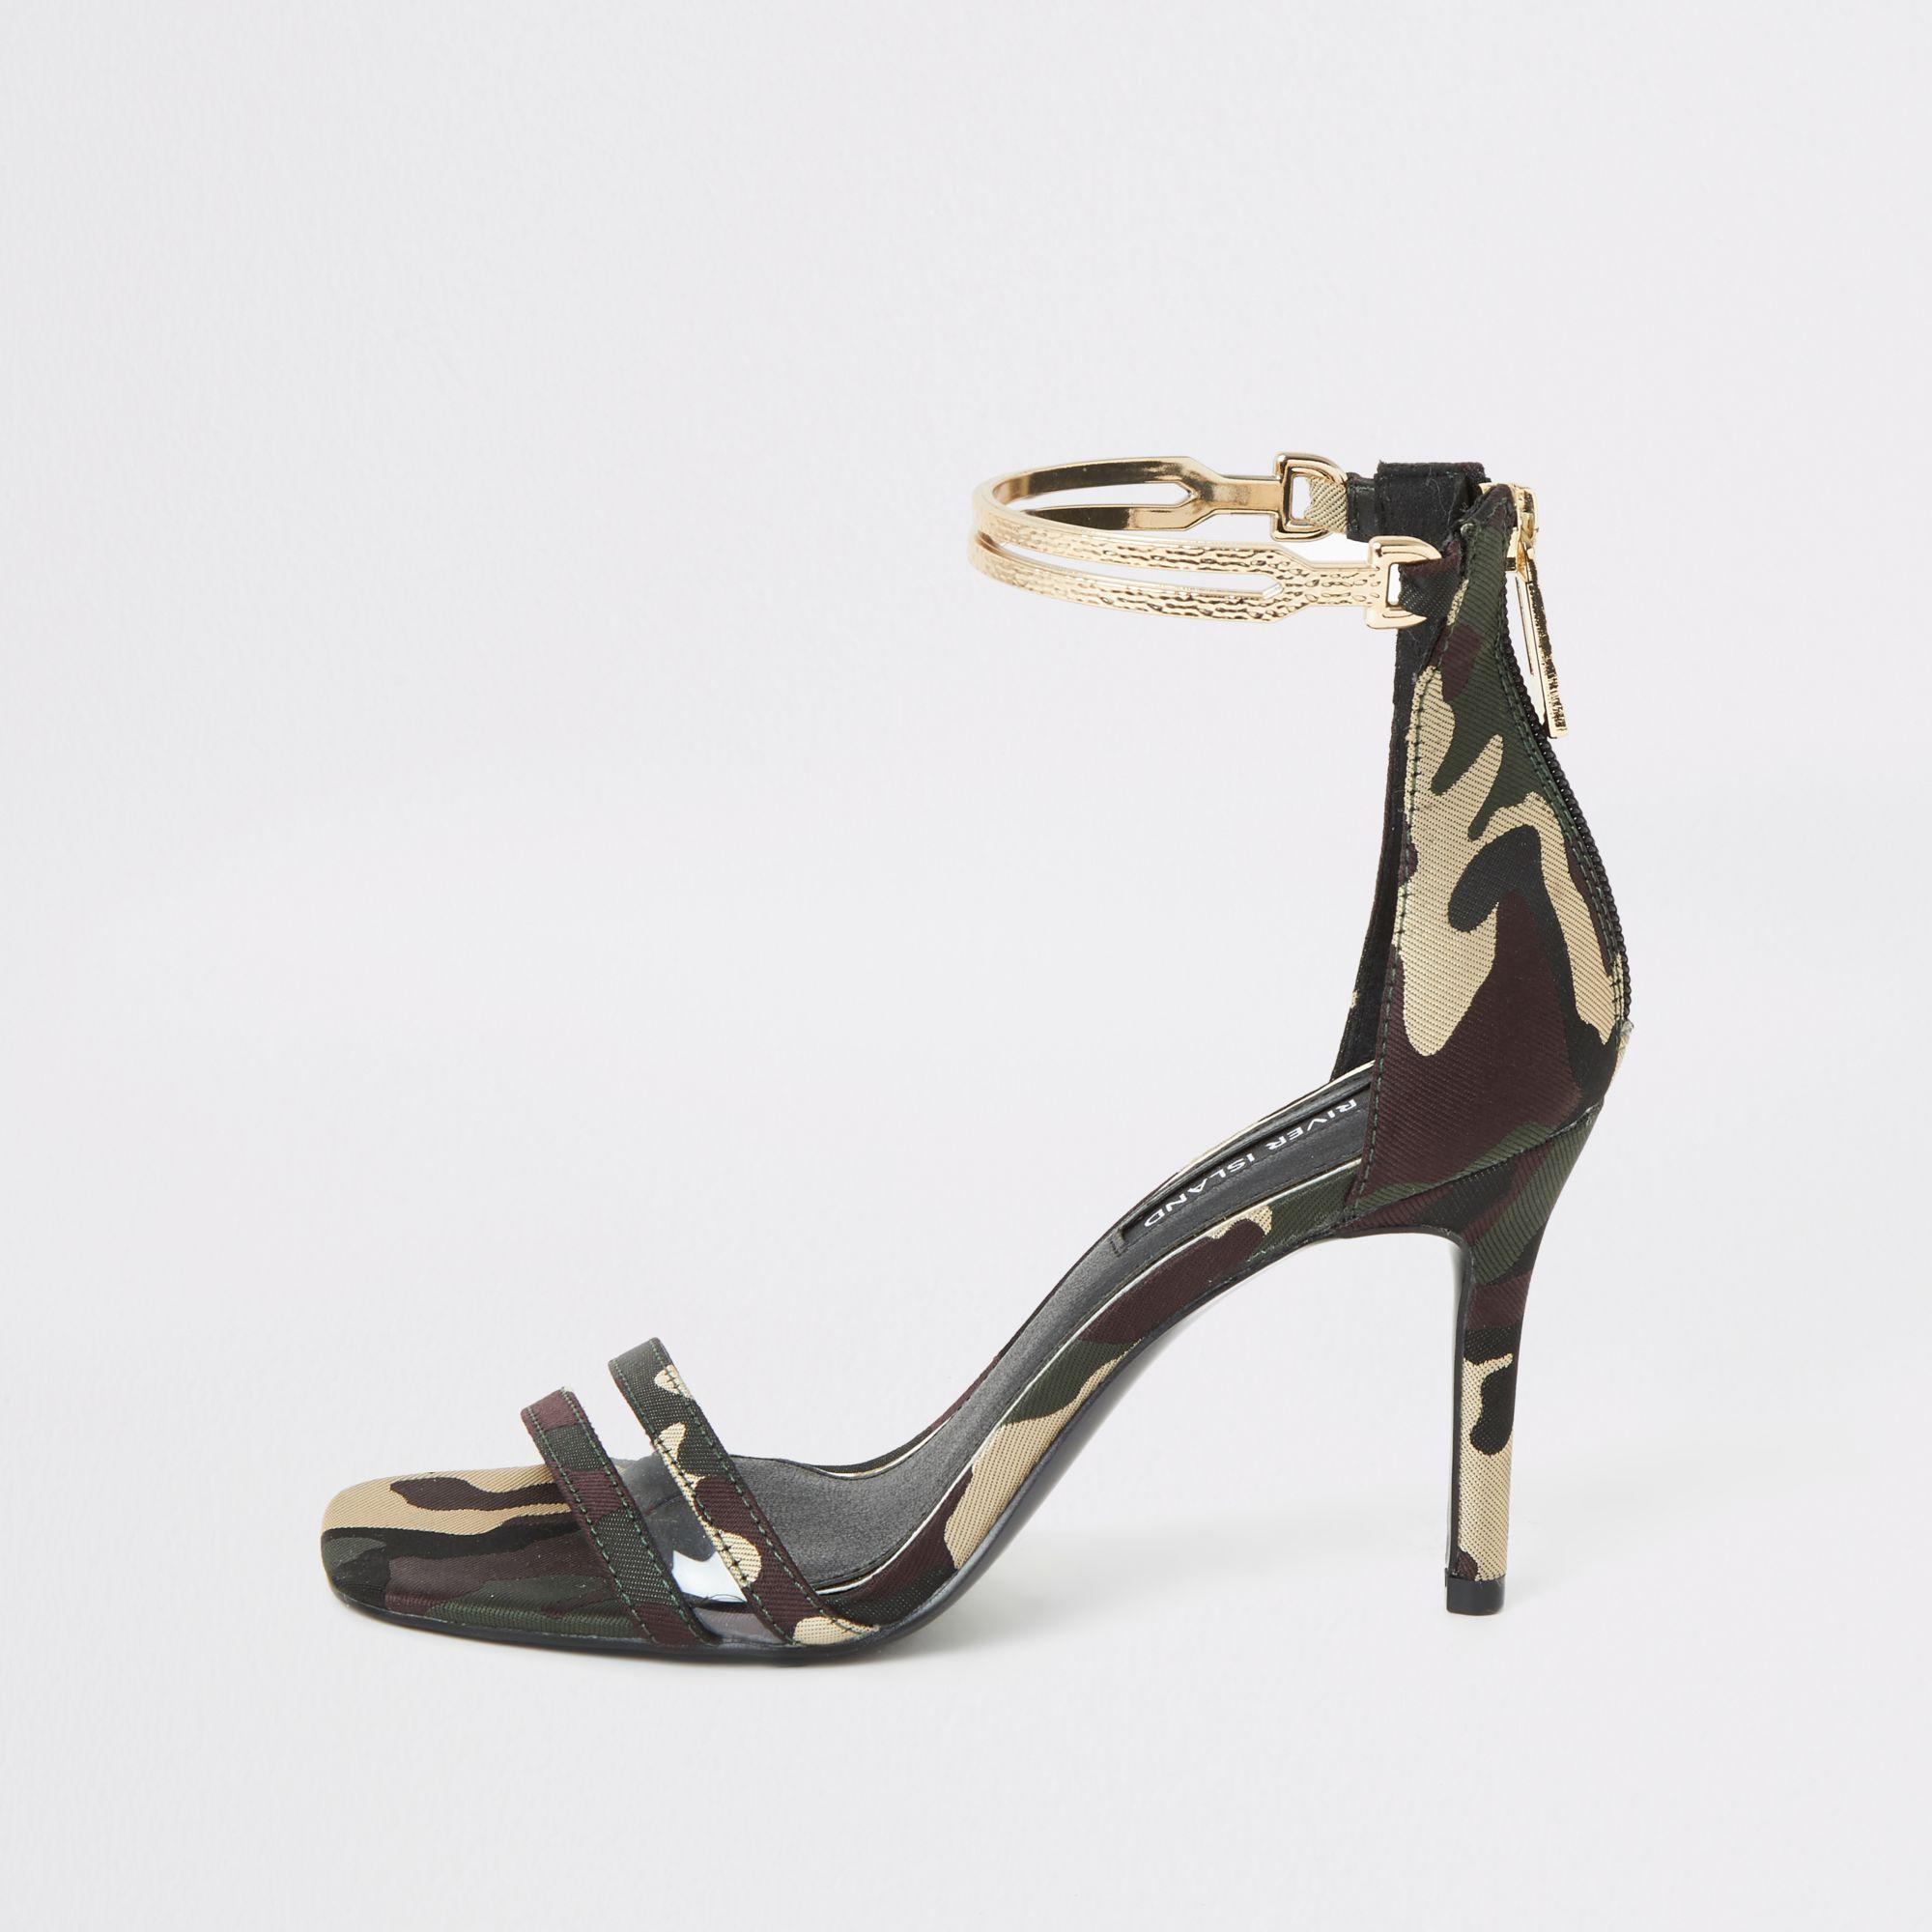 River Island Camo High Heel Gold Ankle Cuff Sandal in Green | Lyst